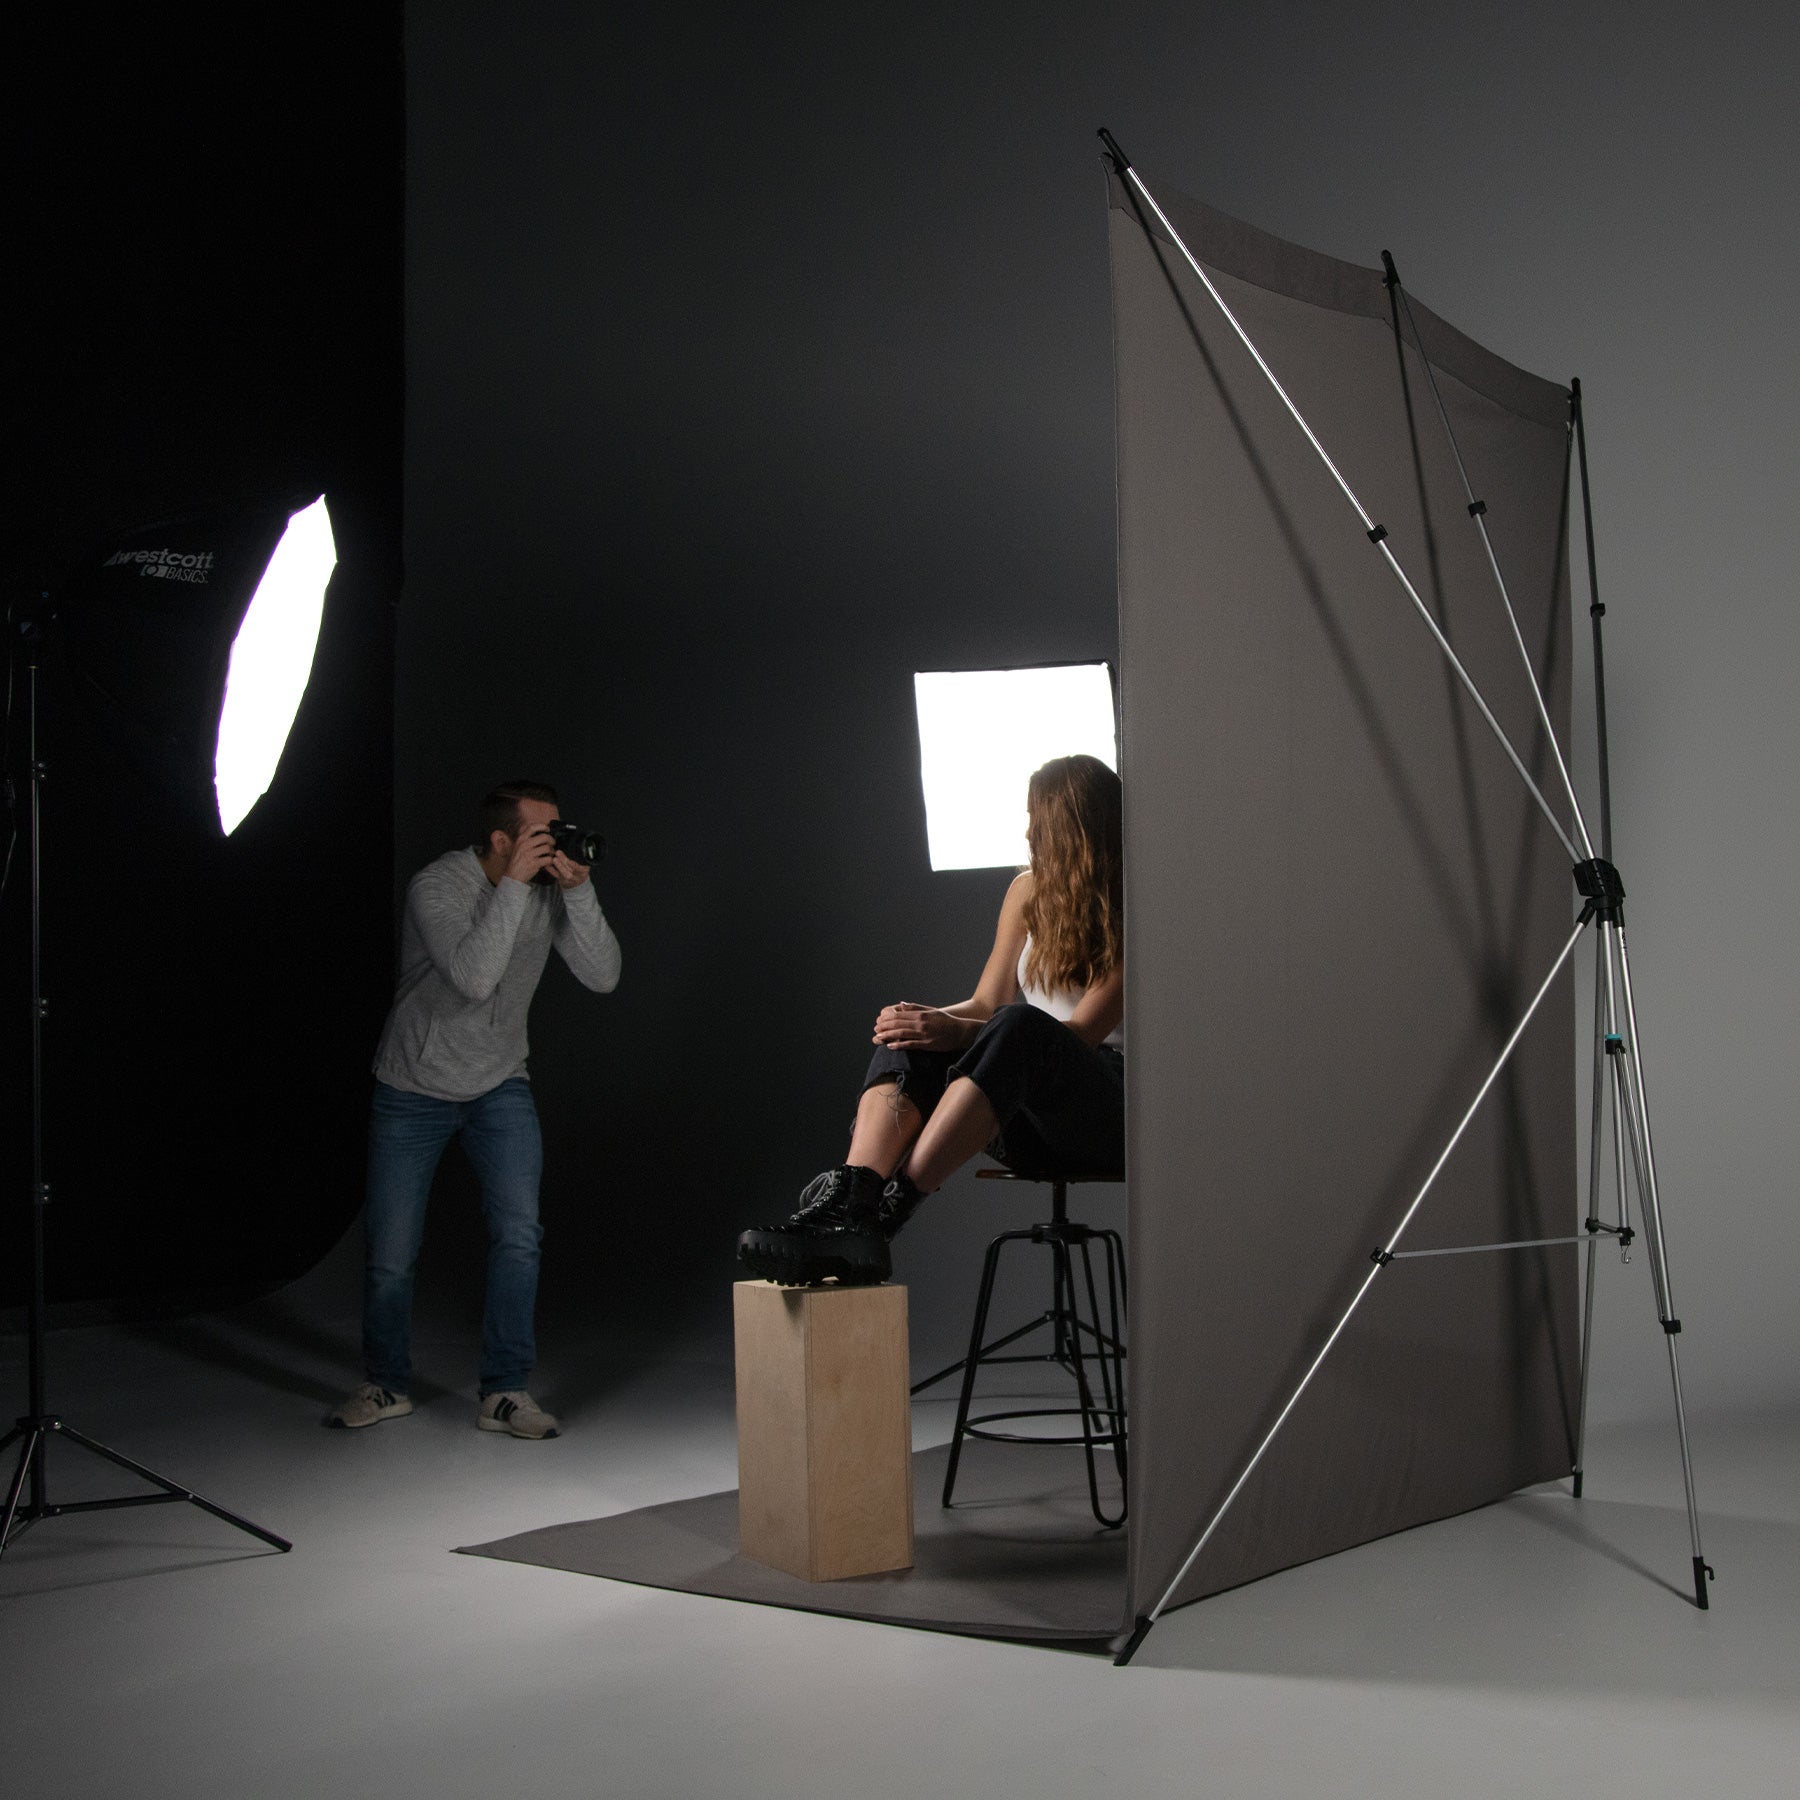 In-studio portrait Using X-Drop Backdrop System and uLites